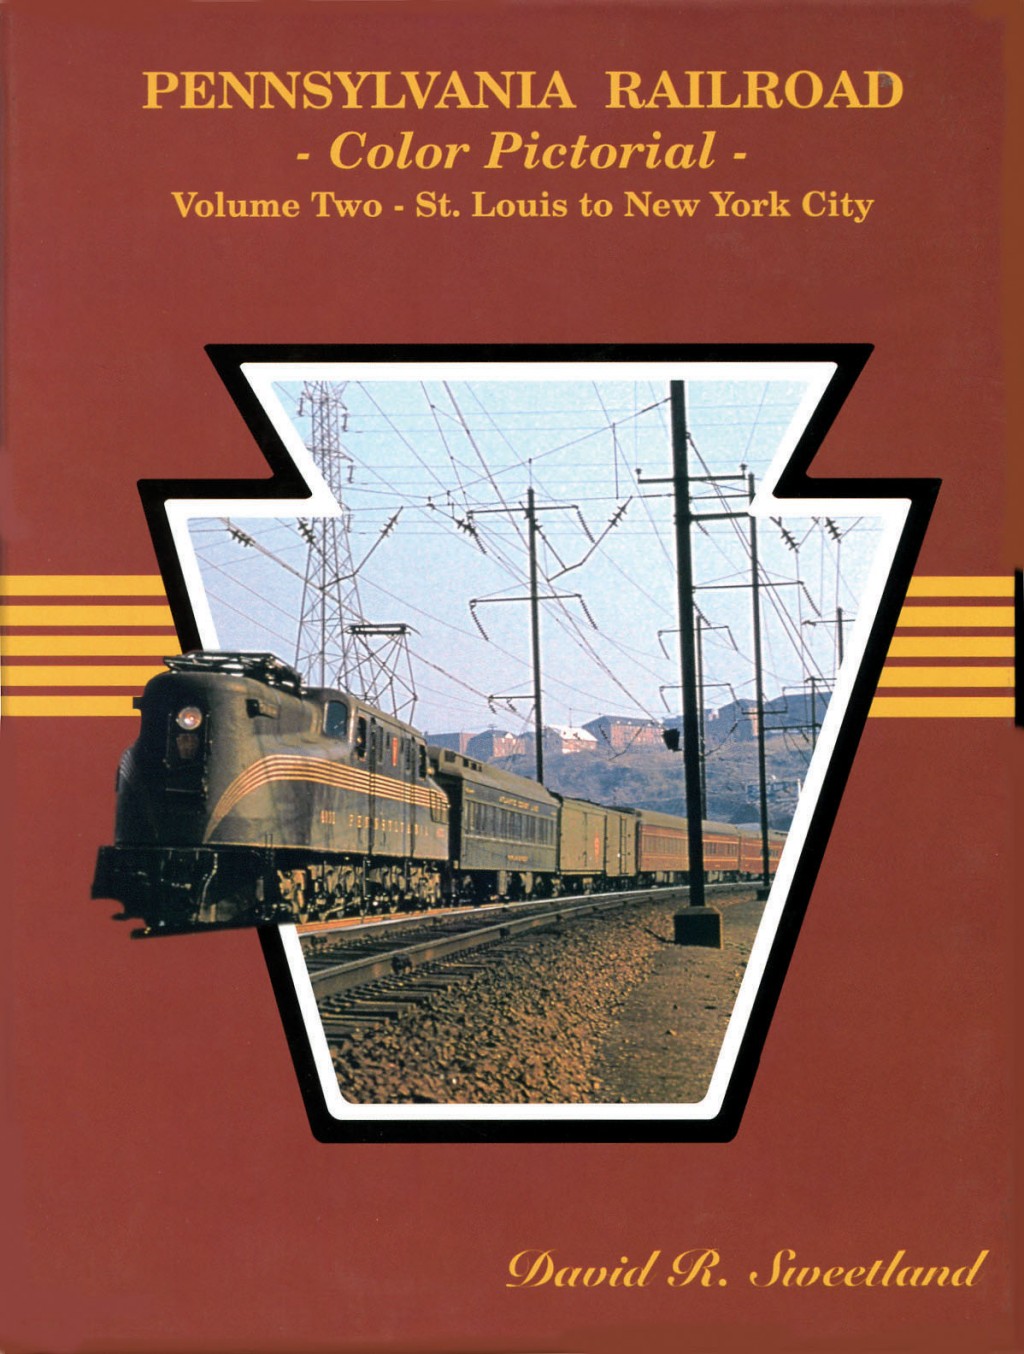 Pennsylvania Railroad Color Pictorial: Volume Two - St. Louis to New York City